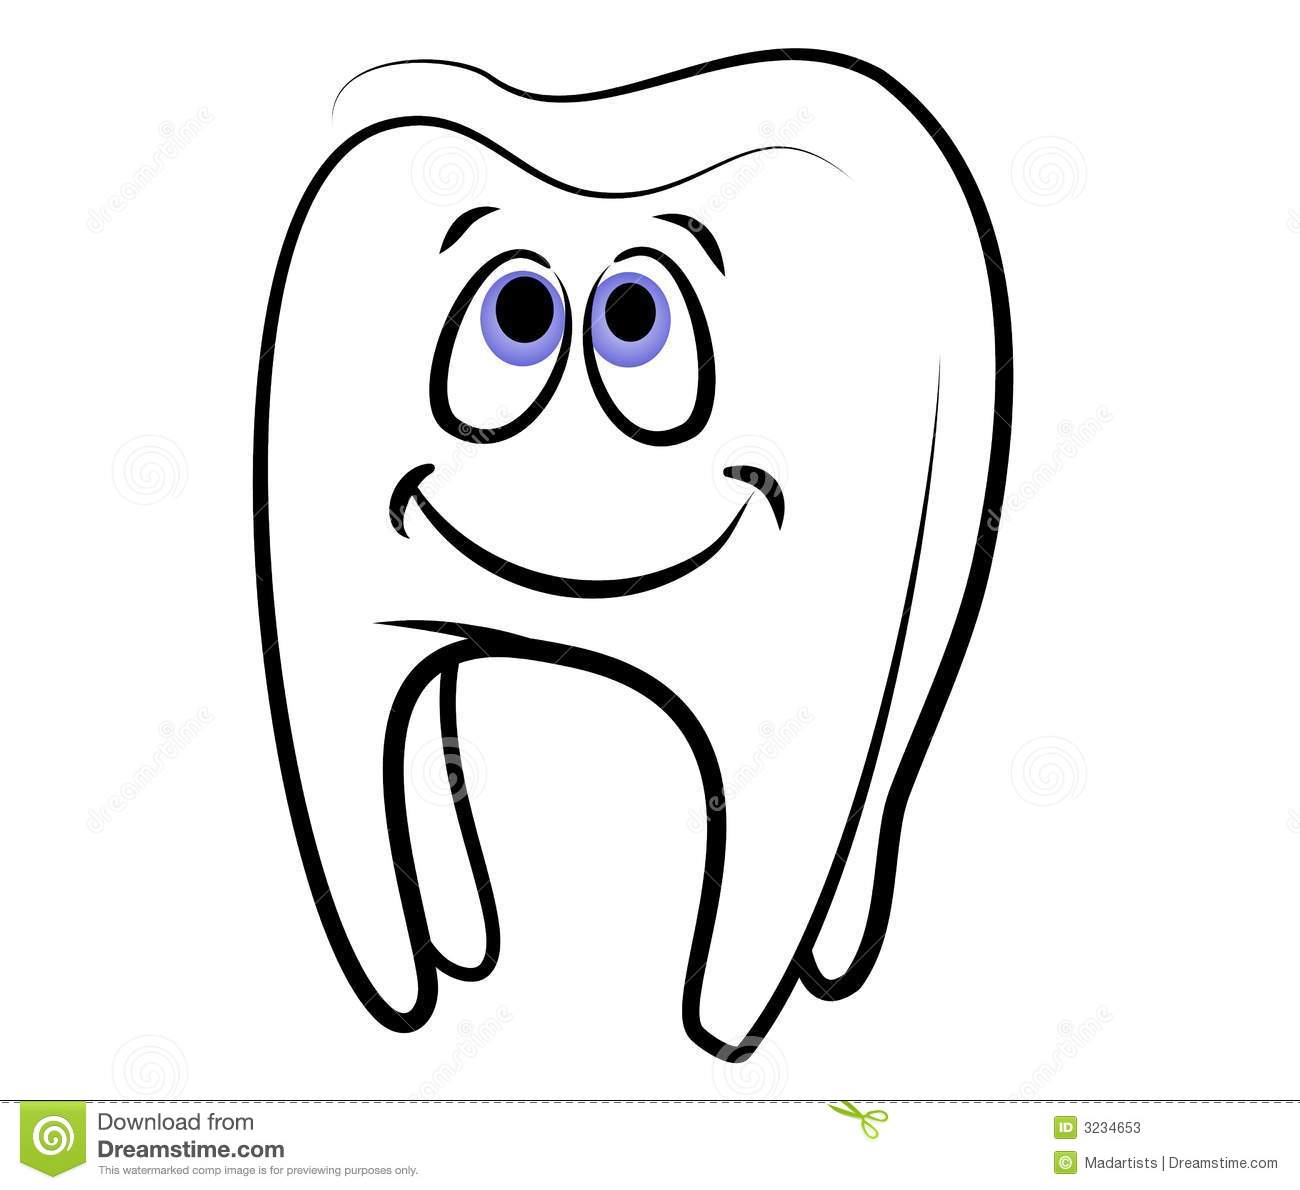 Clip Art Illustration Of A Cartoonish Looking White Tooth Smiling